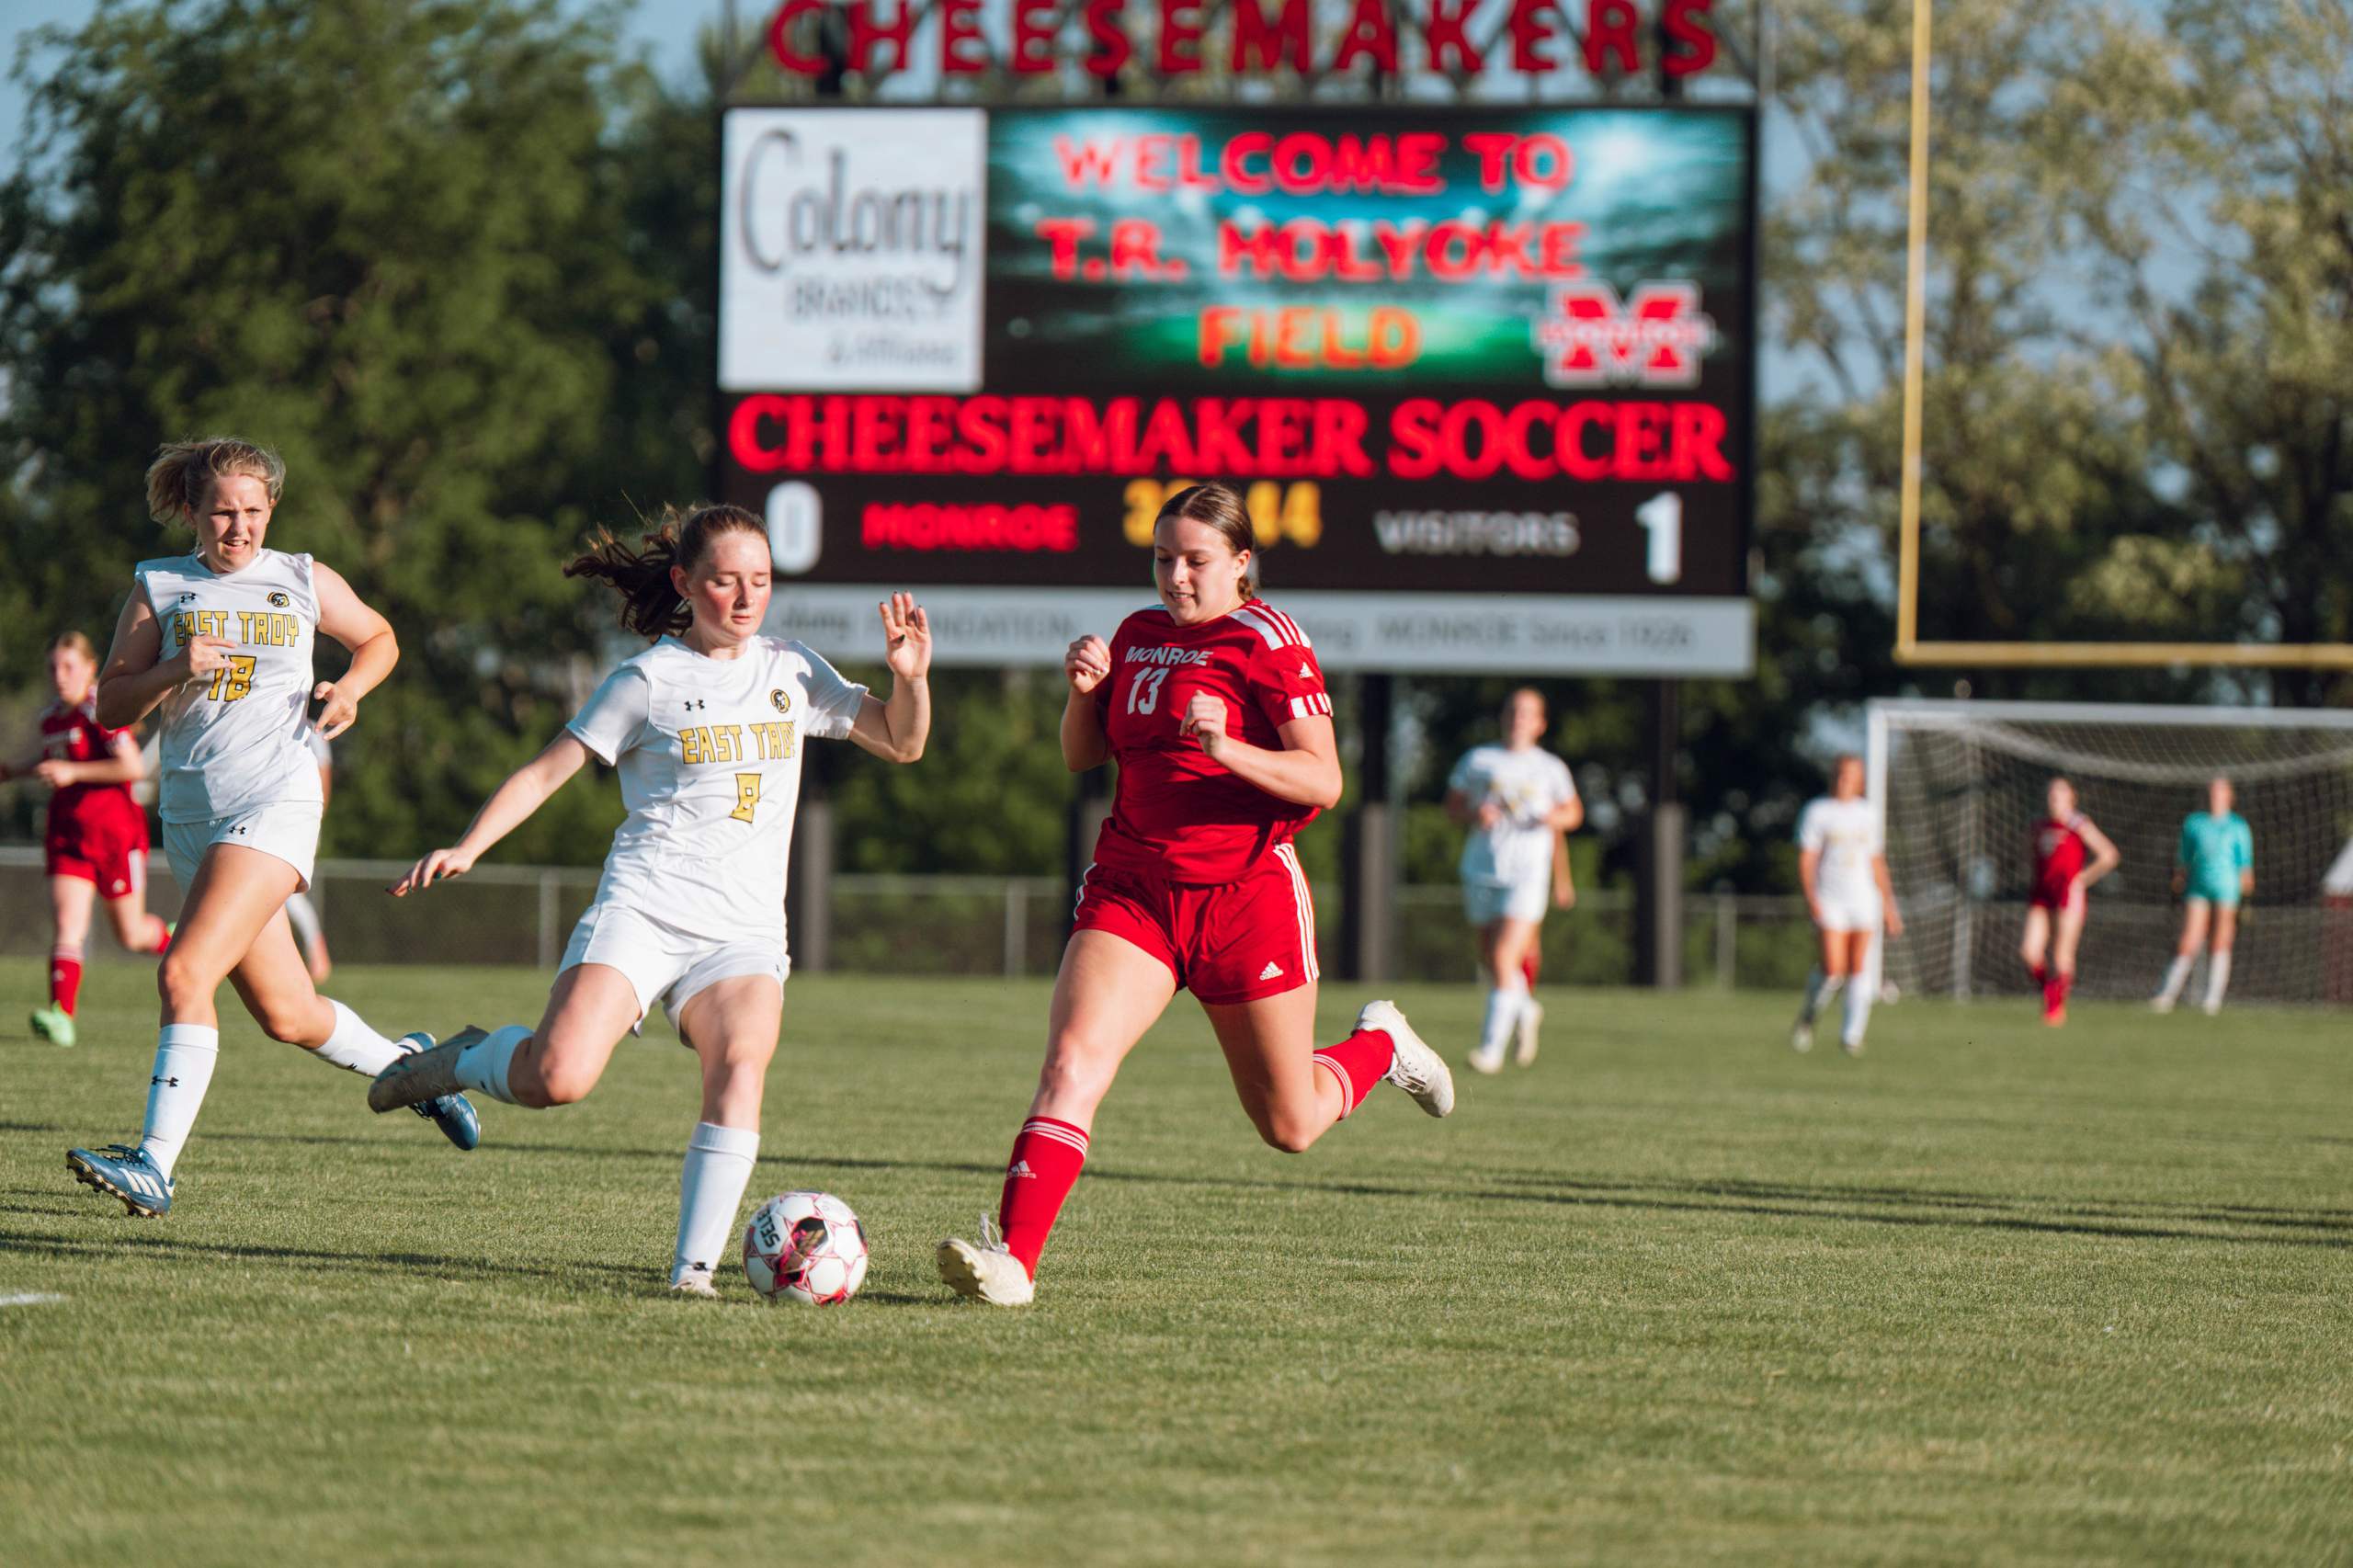 Monroe Soccer vs East Troy, May 20th, 2024, photography by Ross Harried for Second Crop Sports